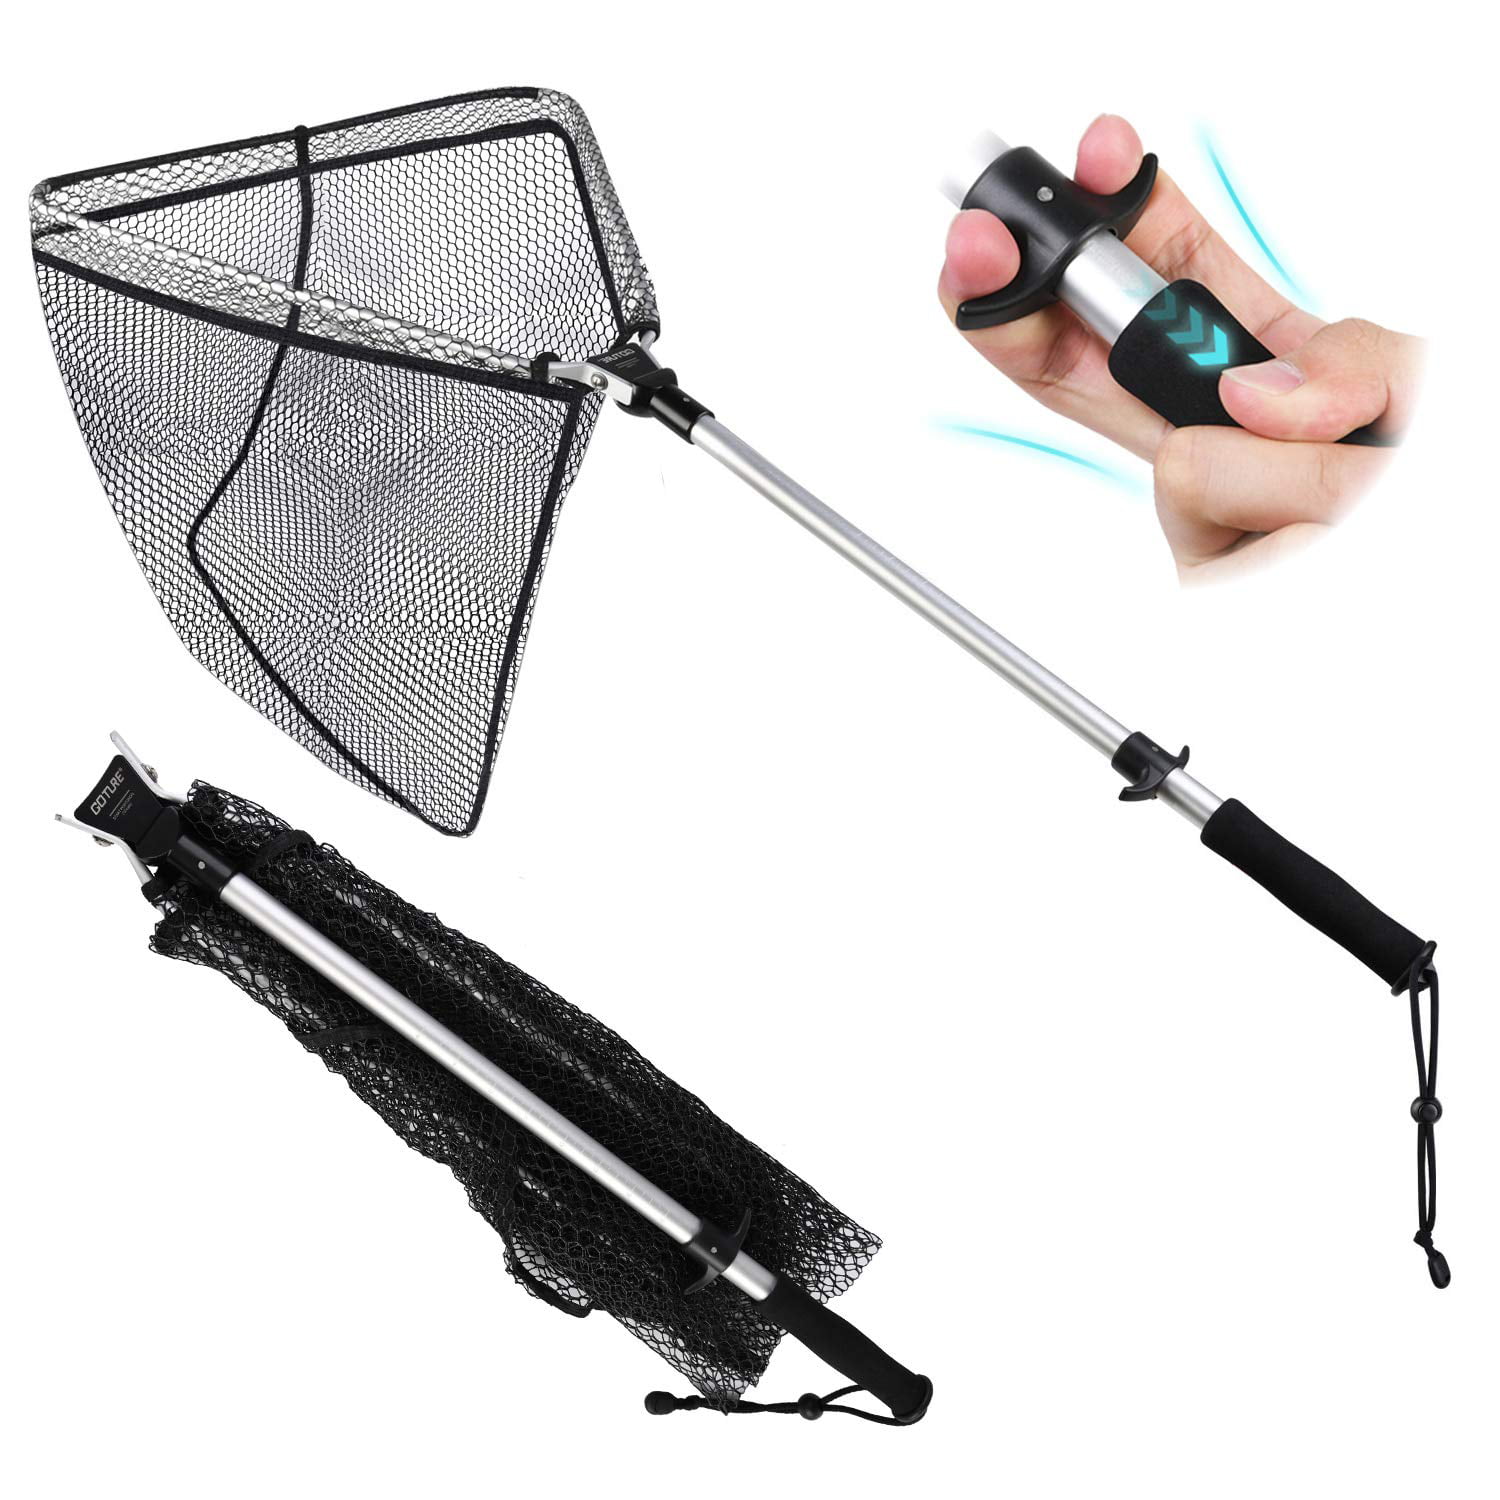 Goture One-Handed Operation Fishing Net for Saltwater Freshwater